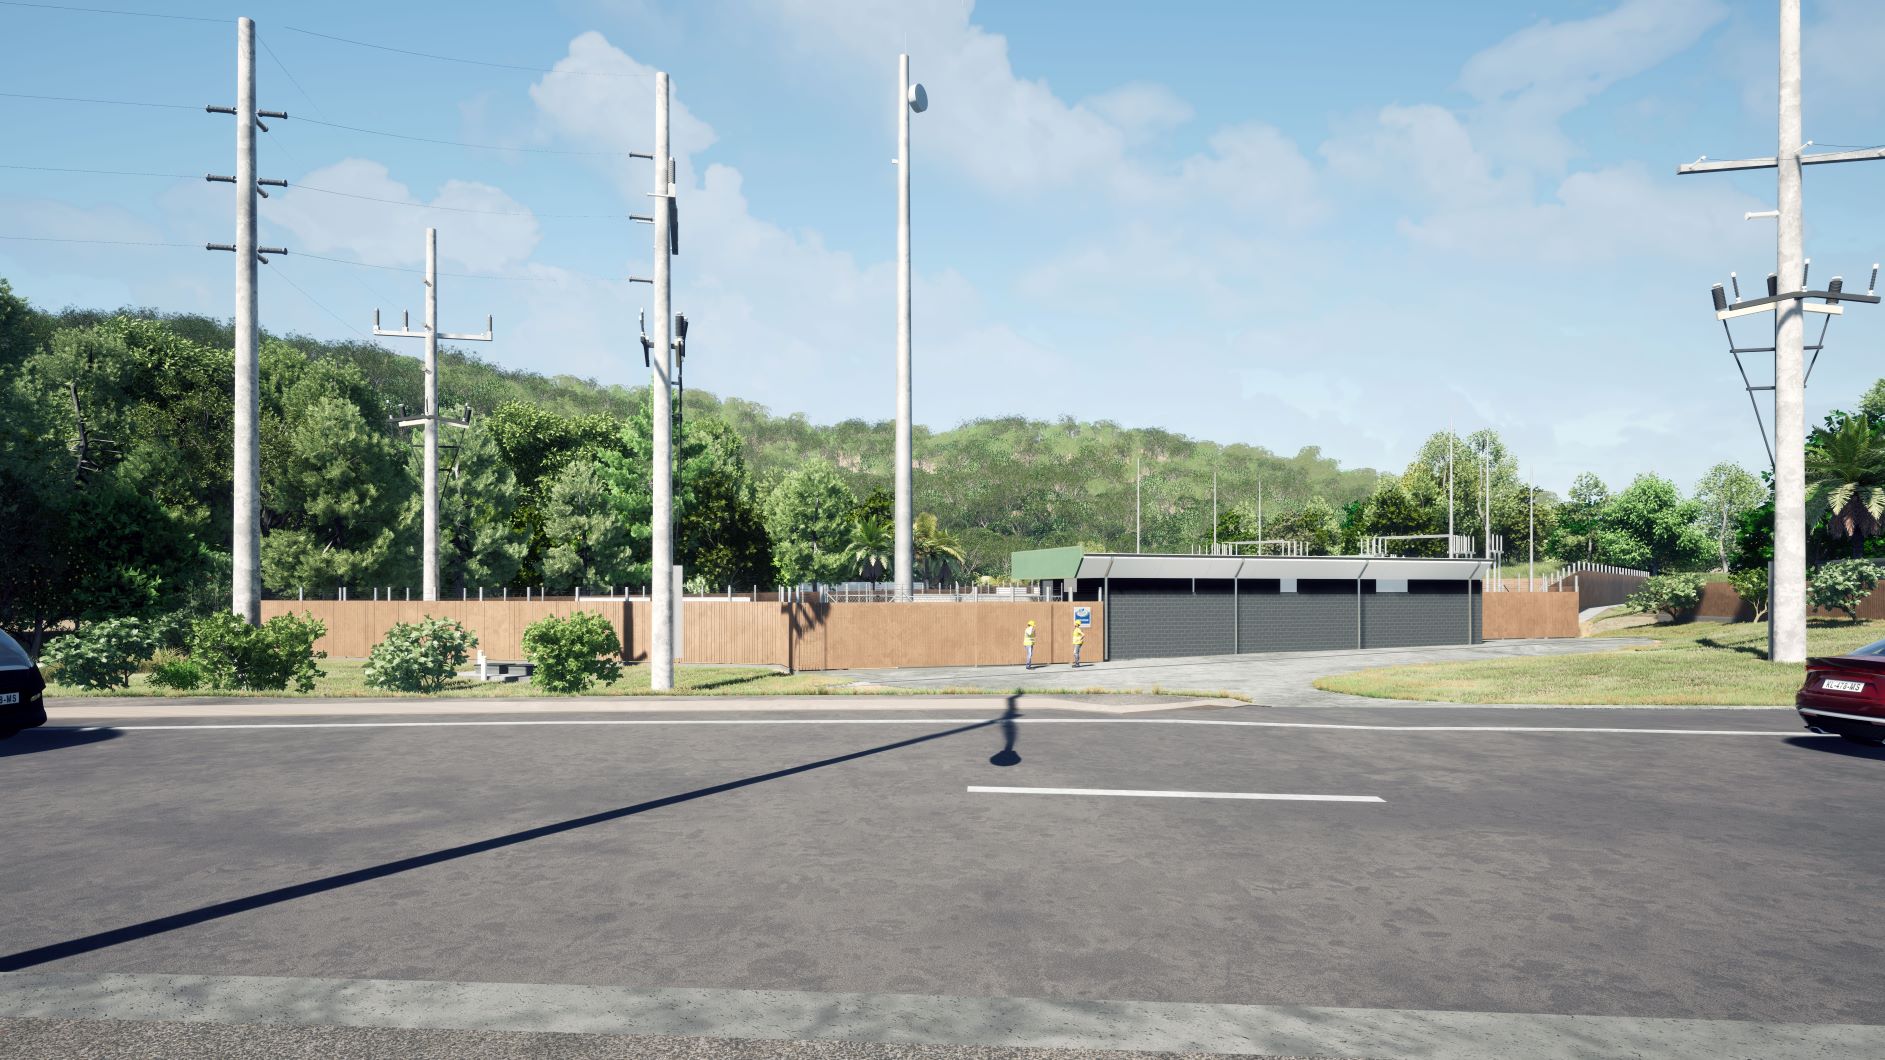 Artist impression of the Substation from Shute Harbour Road